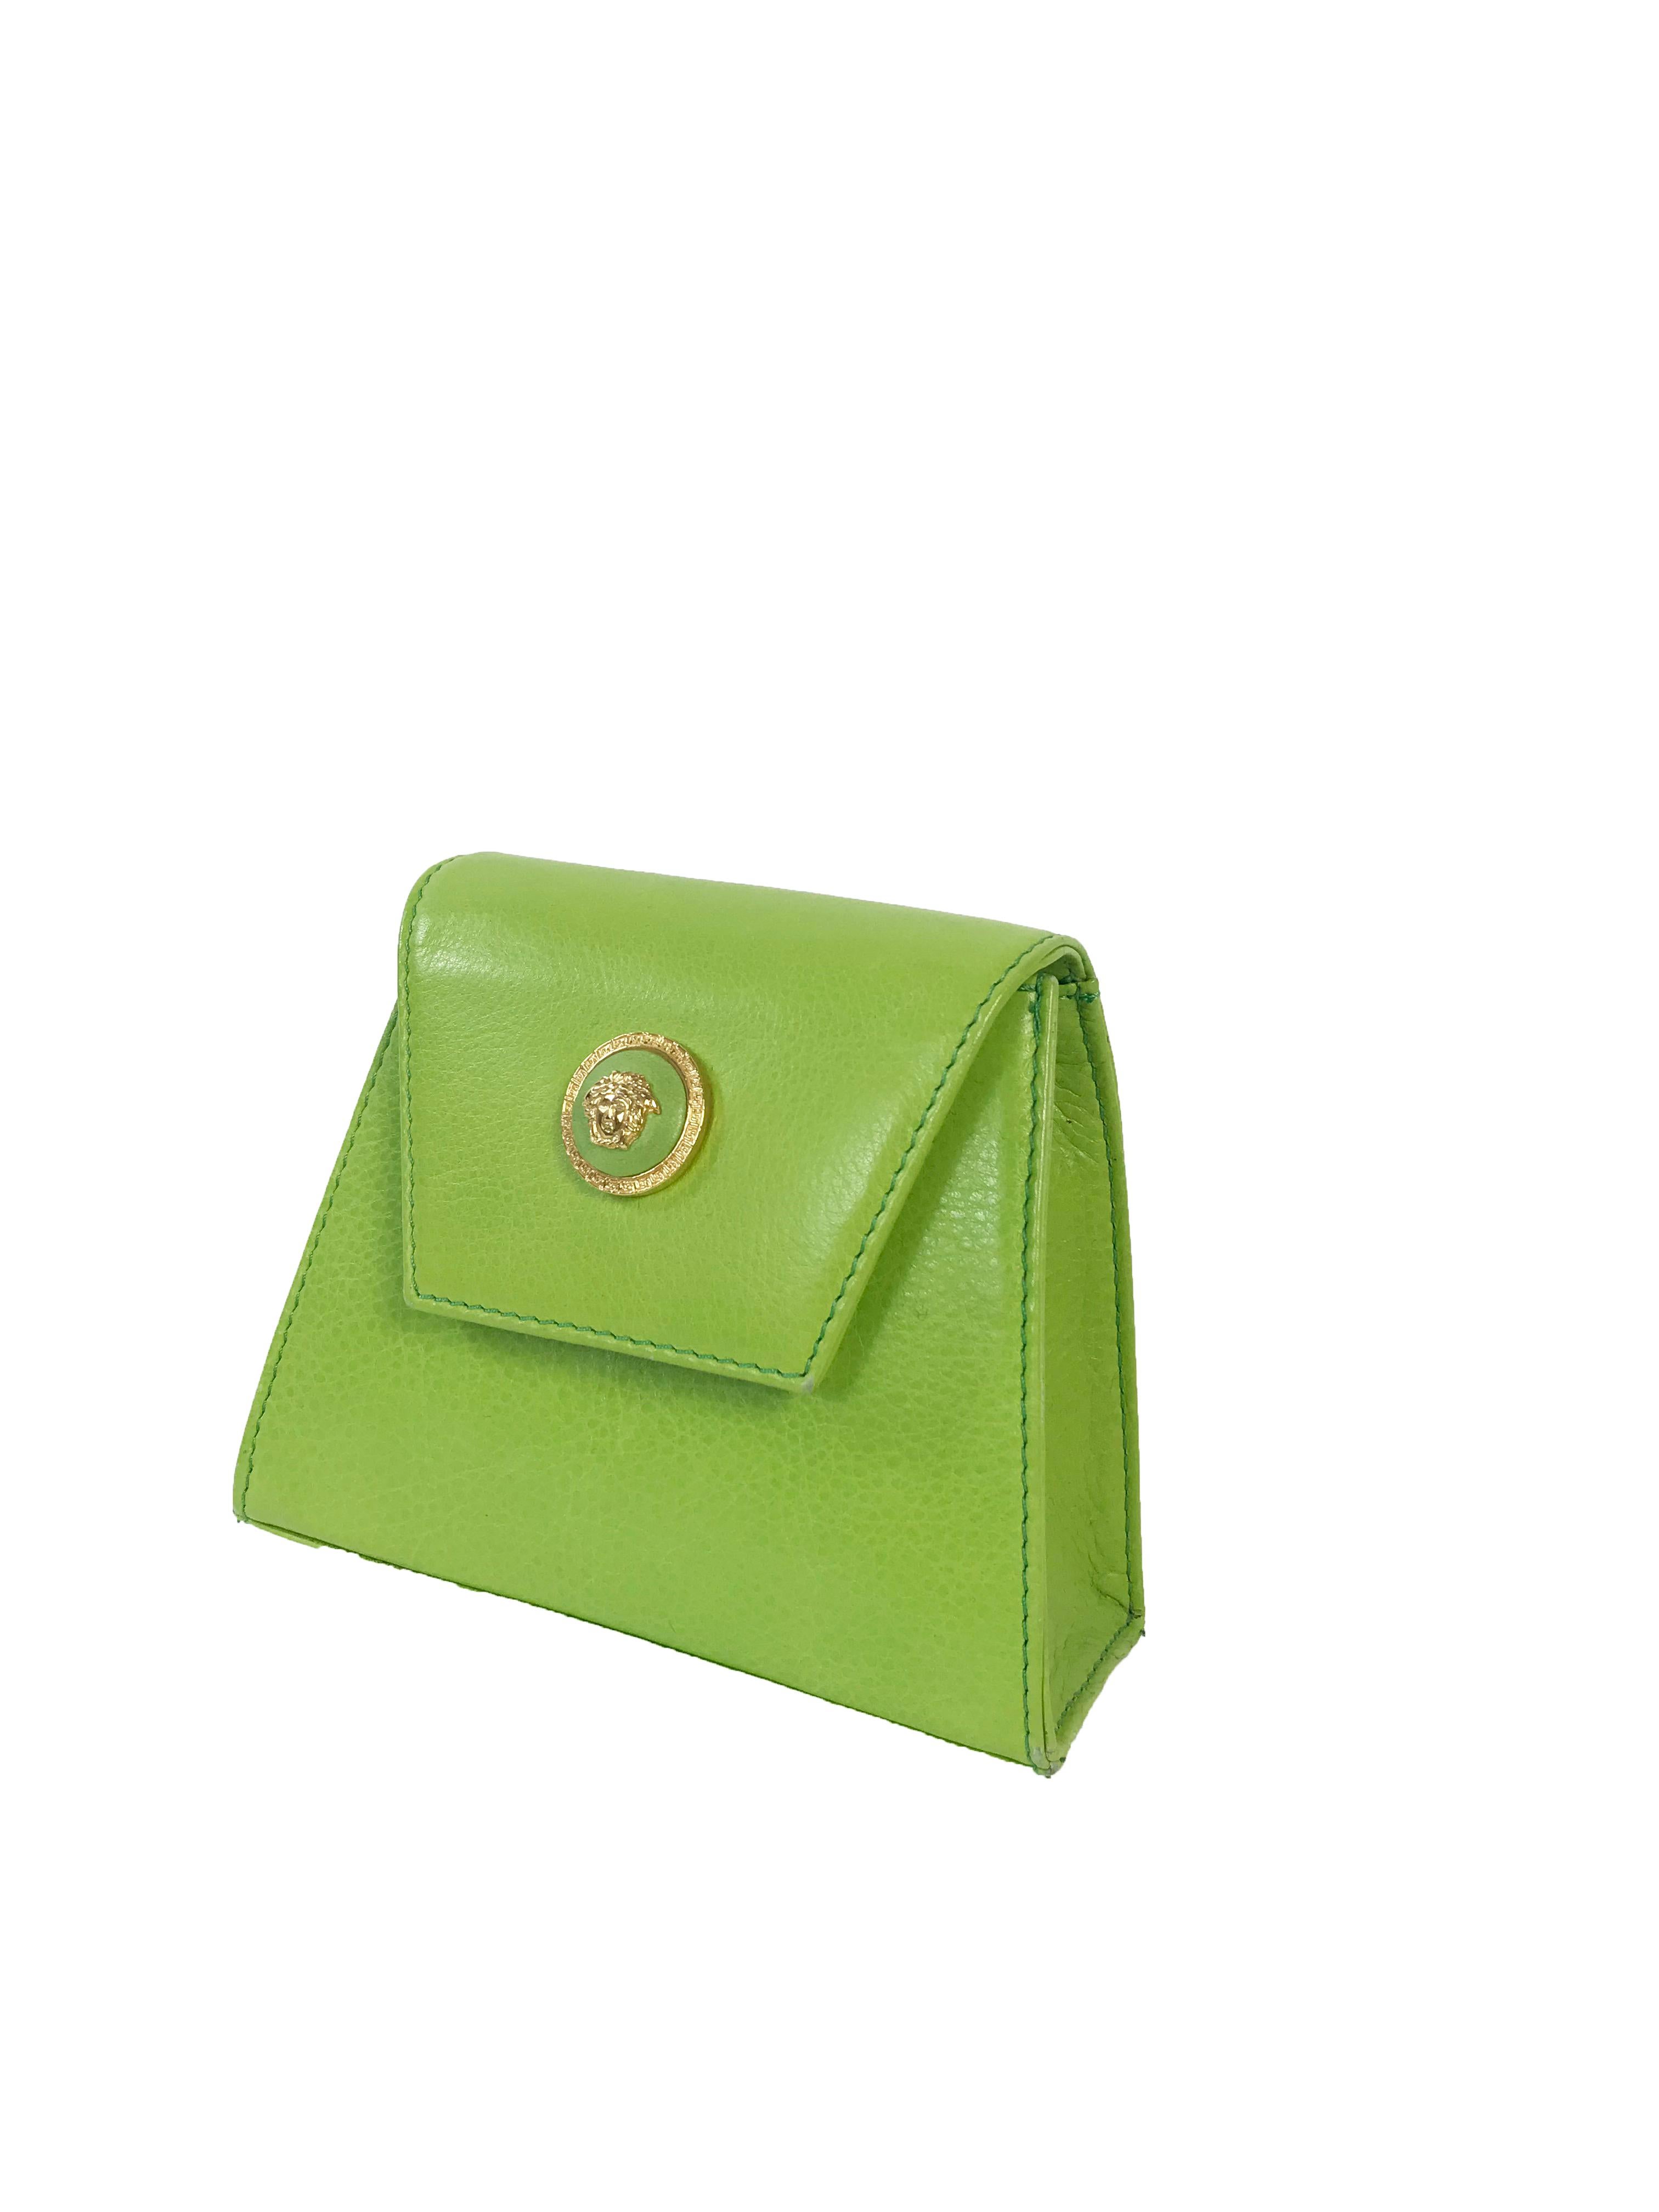 1990s Gianni Versace mini lime green leather wristlet with medusa accents. Condition: Excellent. 

